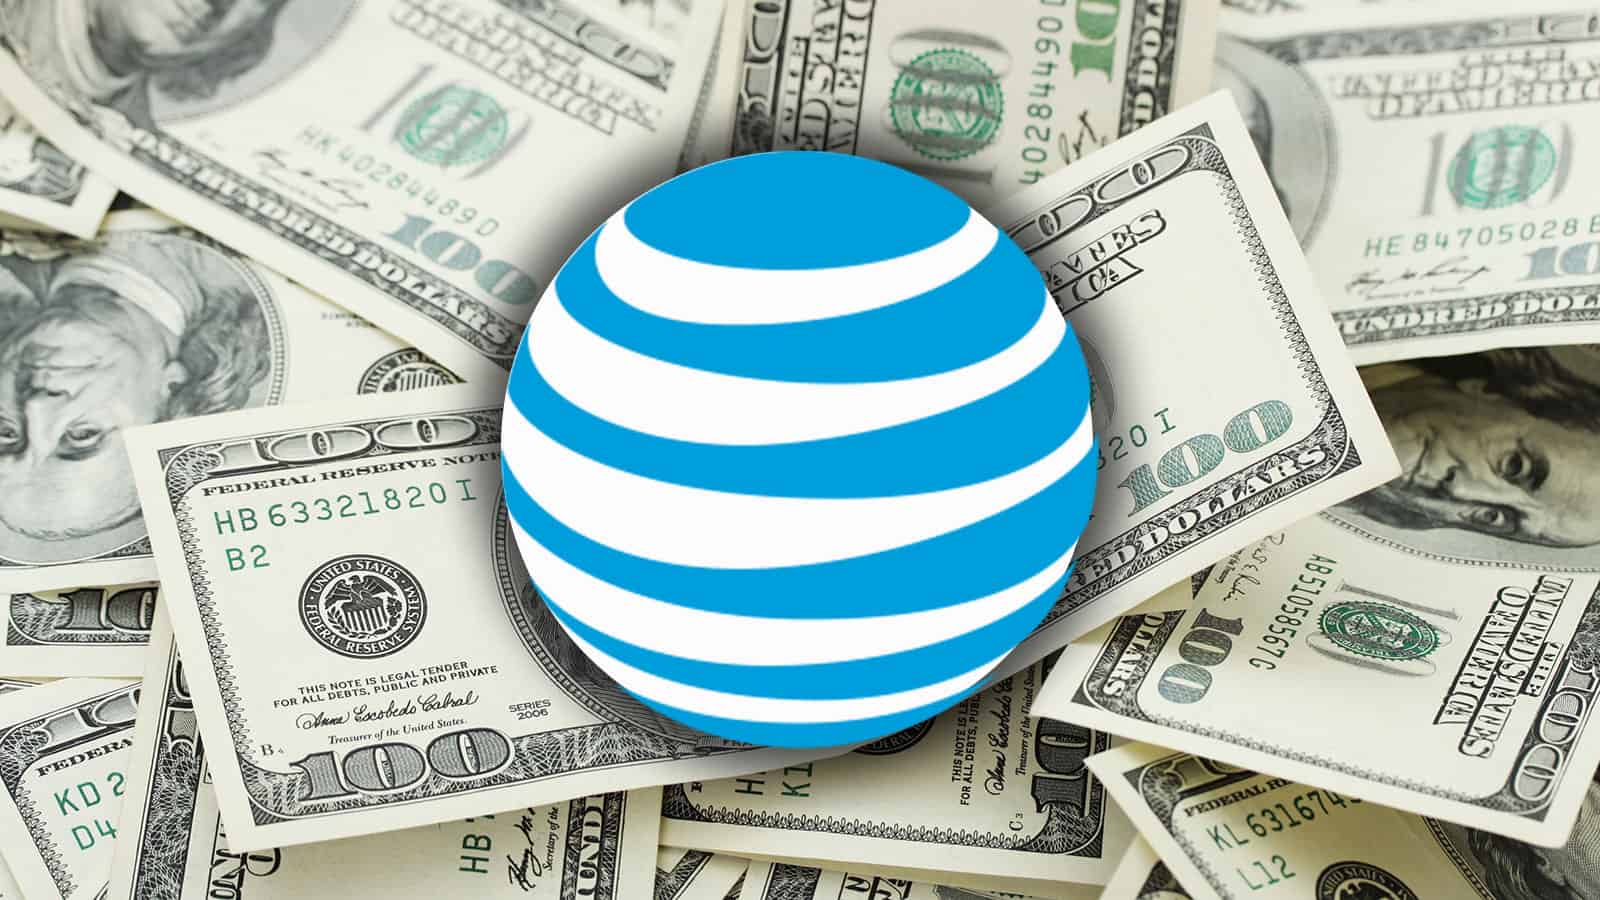 Idiot Judge Ruling in the ATT Merger Had No Clue How Markets Work